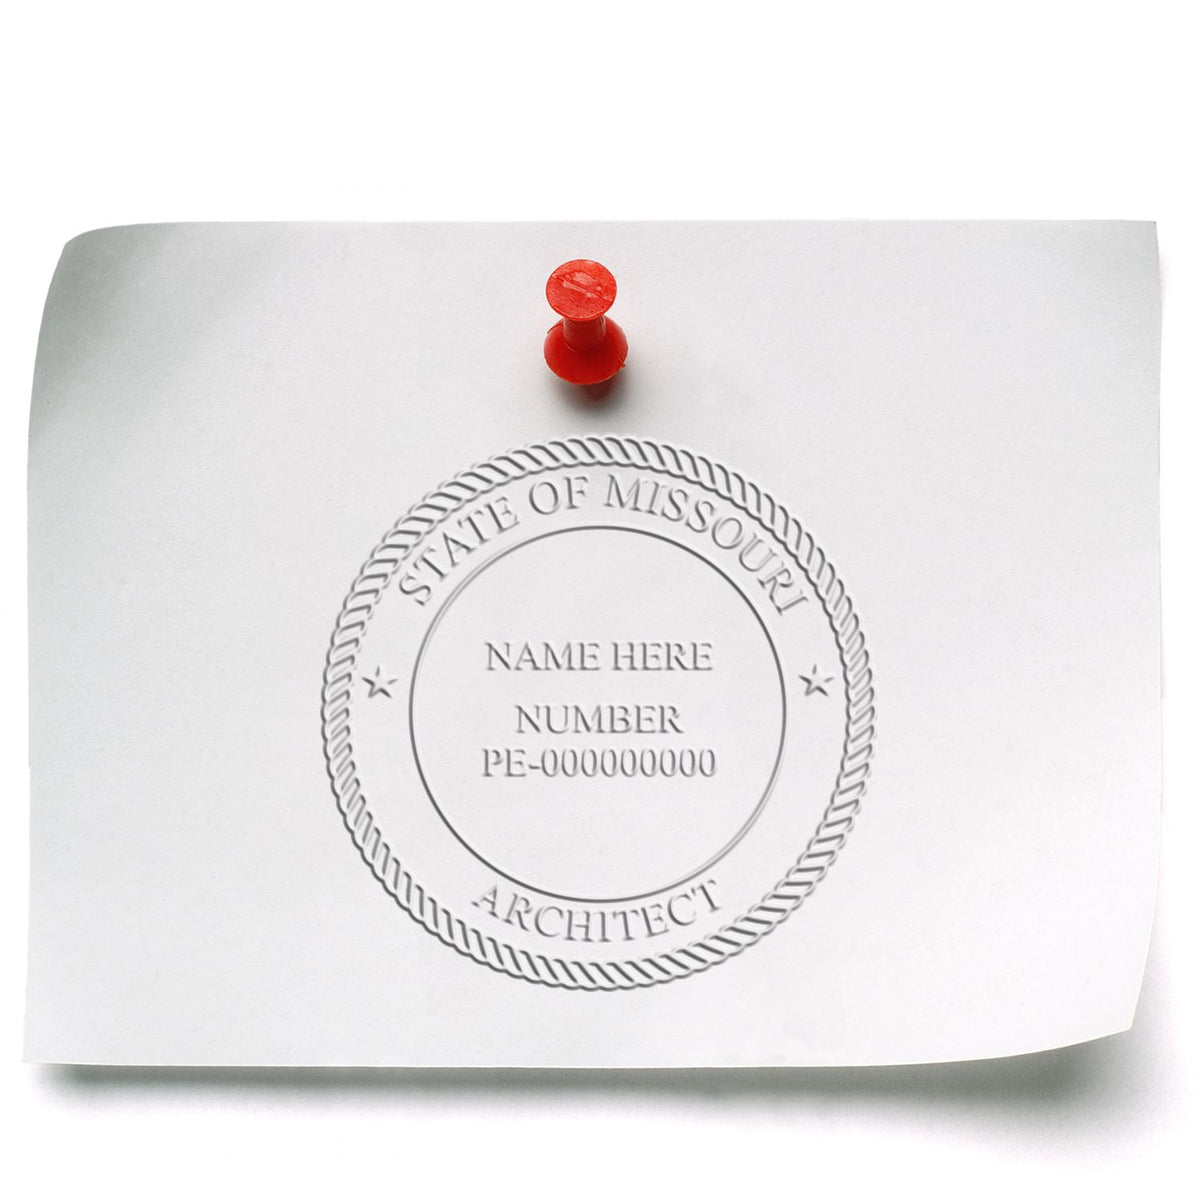 This paper is stamped with a sample imprint of the Handheld Missouri Architect Seal Embosser, signifying its quality and reliability.